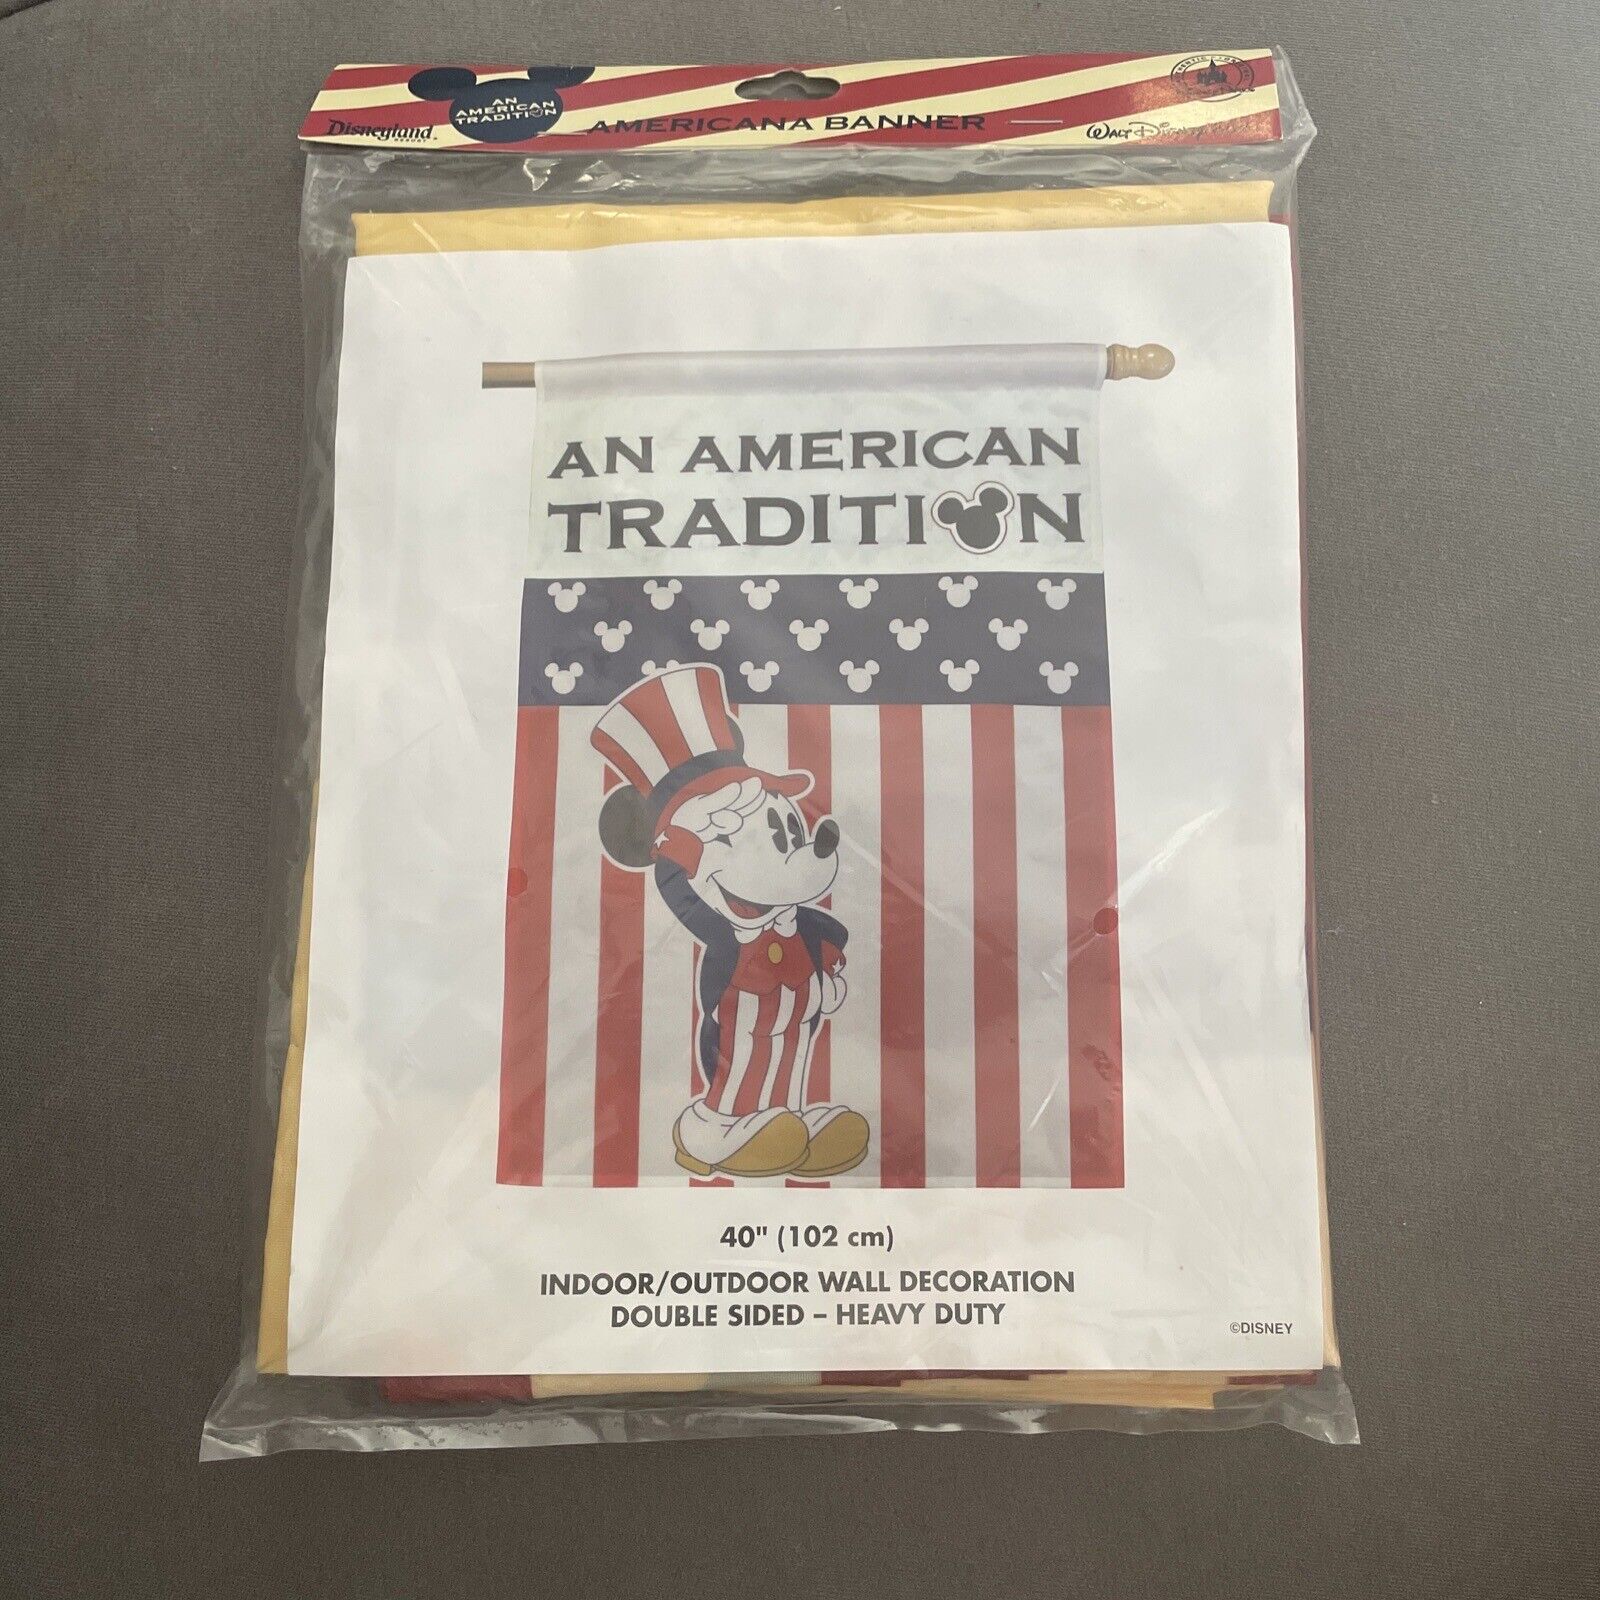 VINTAGE DISNEY AMERICANA MICKEY BANNER An American Tradition NEW